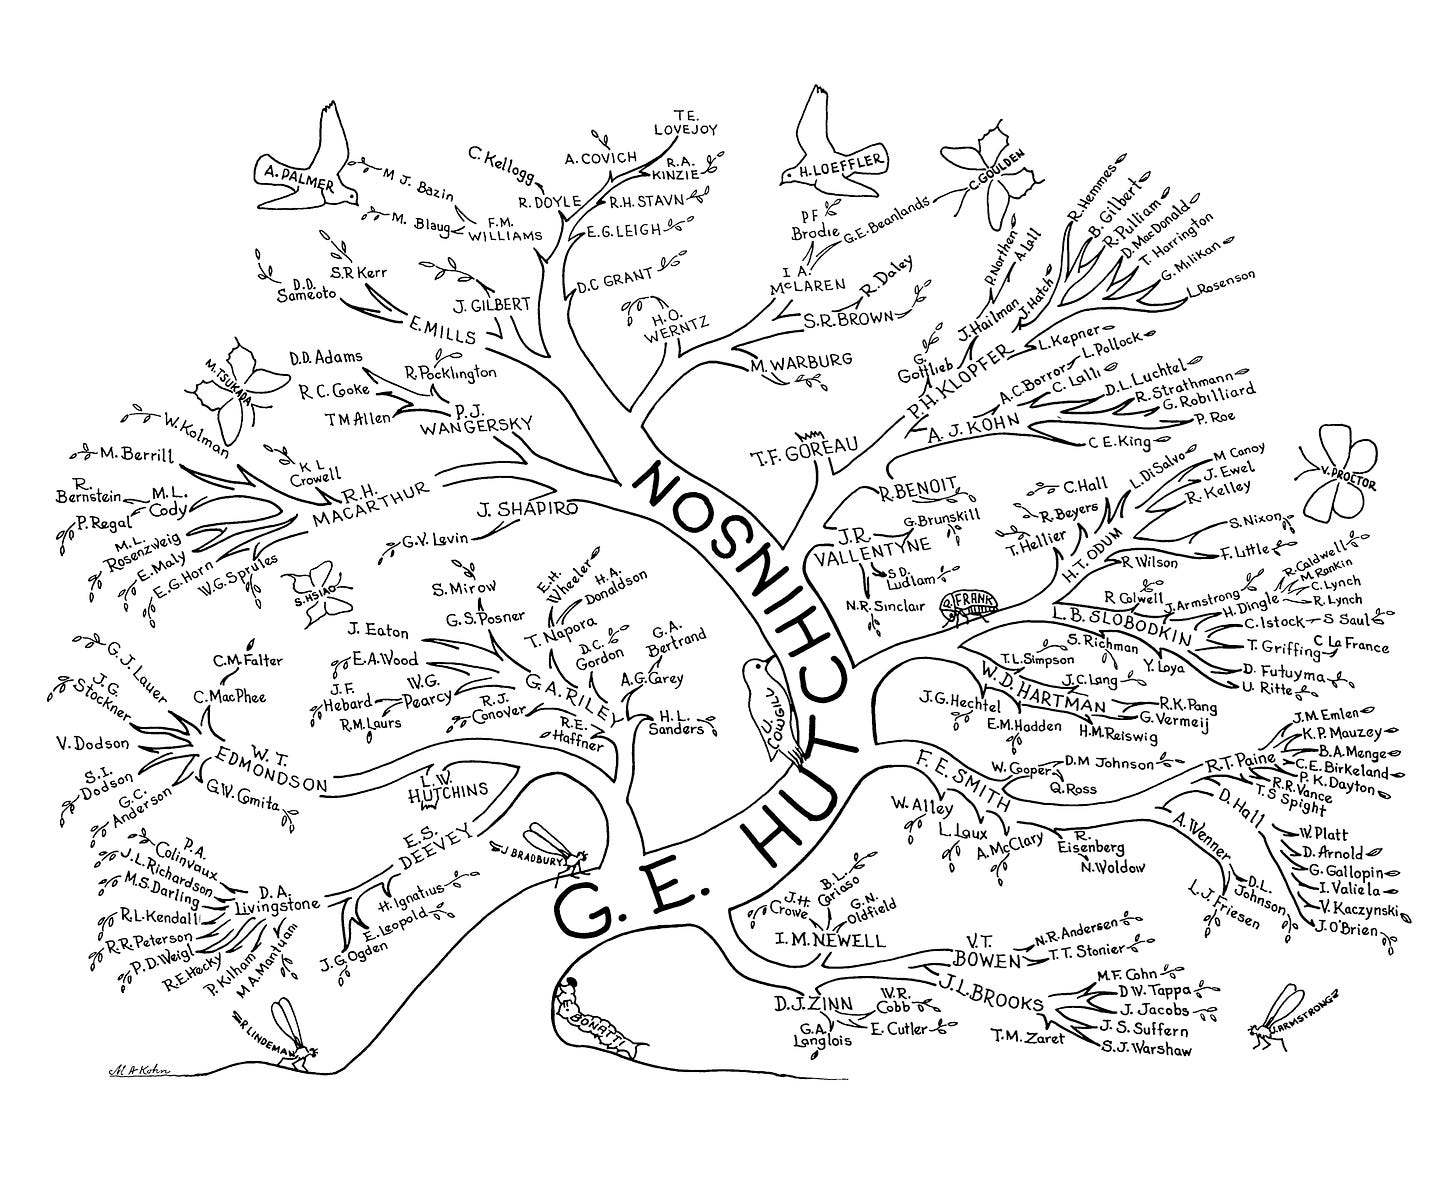 the original caption reads: FIG. 9. Phylogenetic tree of intellectual descendants of G. E. Hutchinson, restricted to those pos- sessing doctoral degrees. Main branches and capitalized names represent Hutchinson's own doctoral students. Secondary branches and twigs with lower-case names indicate second- and third-generation students. Terminal leaves indicate completed degrees, their absence means Ph.D. expected in 1971. The attendant fauna represent people who have done postdoctoral work with Hutchinson; their par- ticular character and disposition were dictated by aesthetic considerations alone.